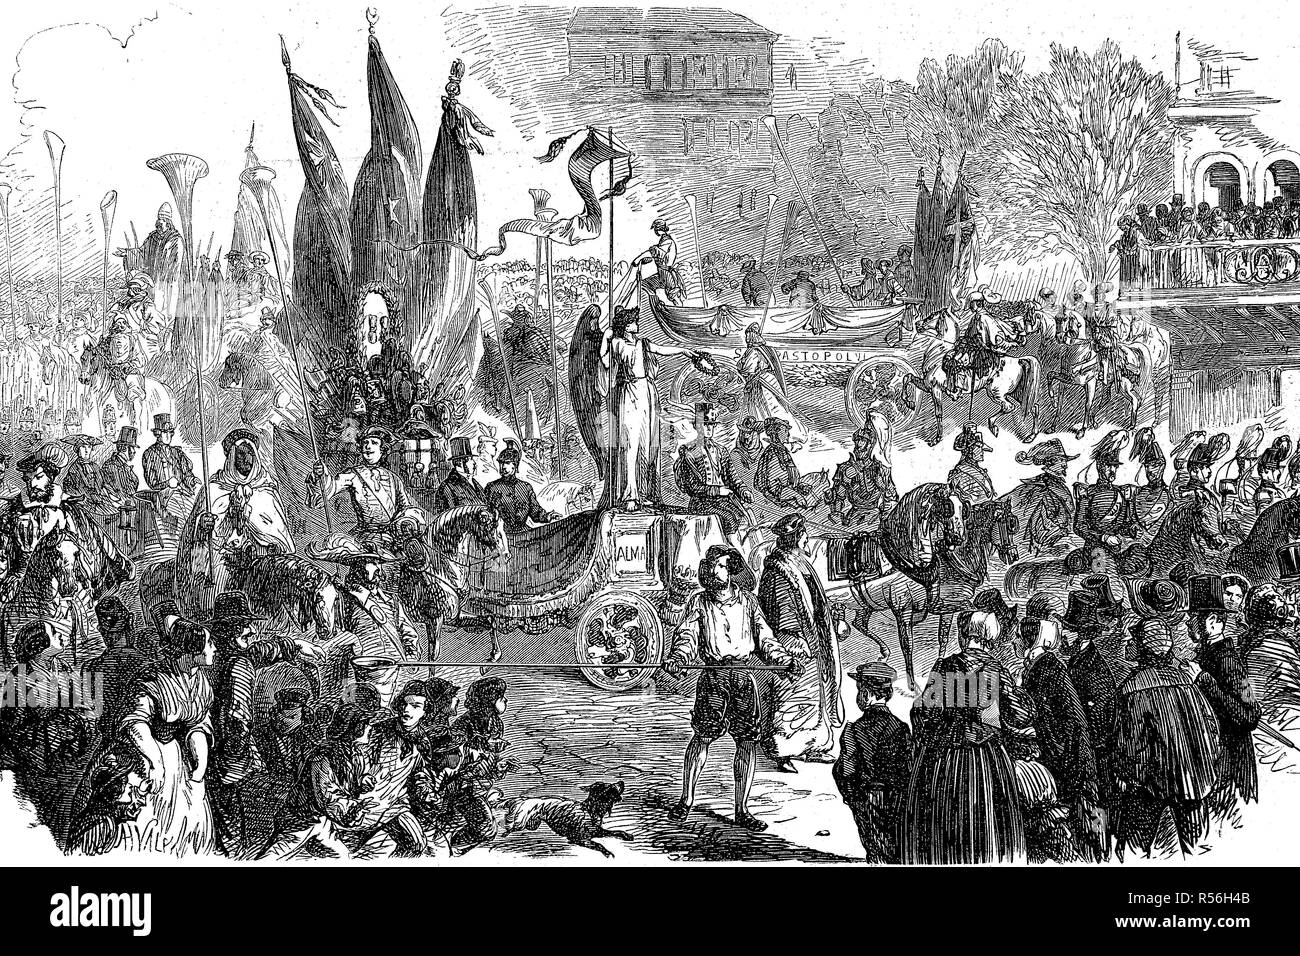 Collection for the Army of the Orient in Toulon, Crimean War, 1855, fundraising, woodcut, France Stock Photo